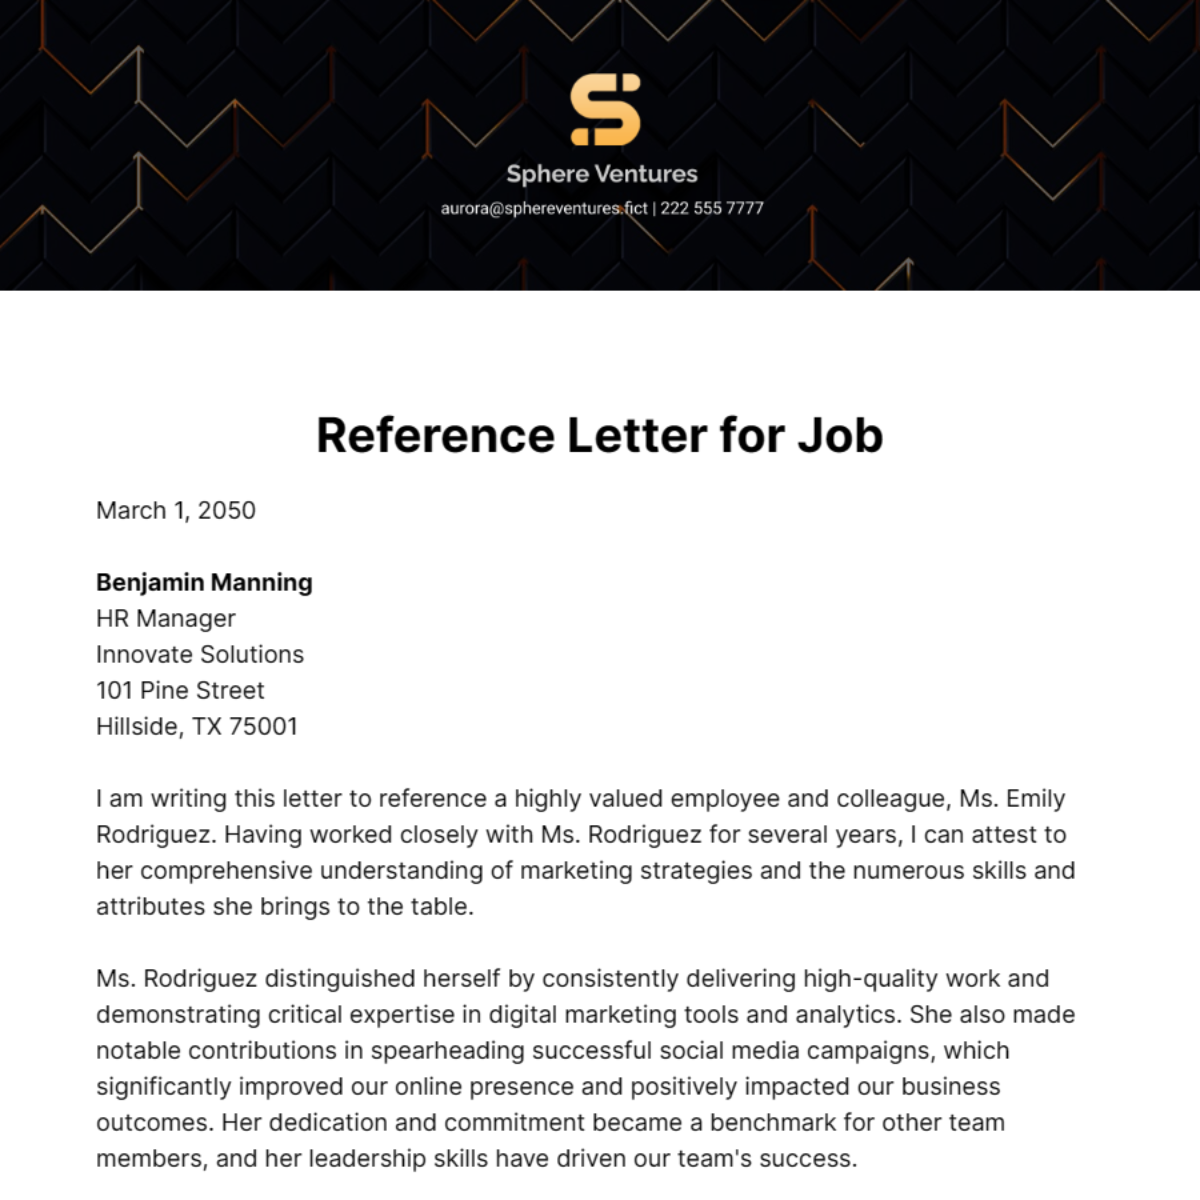 Reference Letter for Job Template